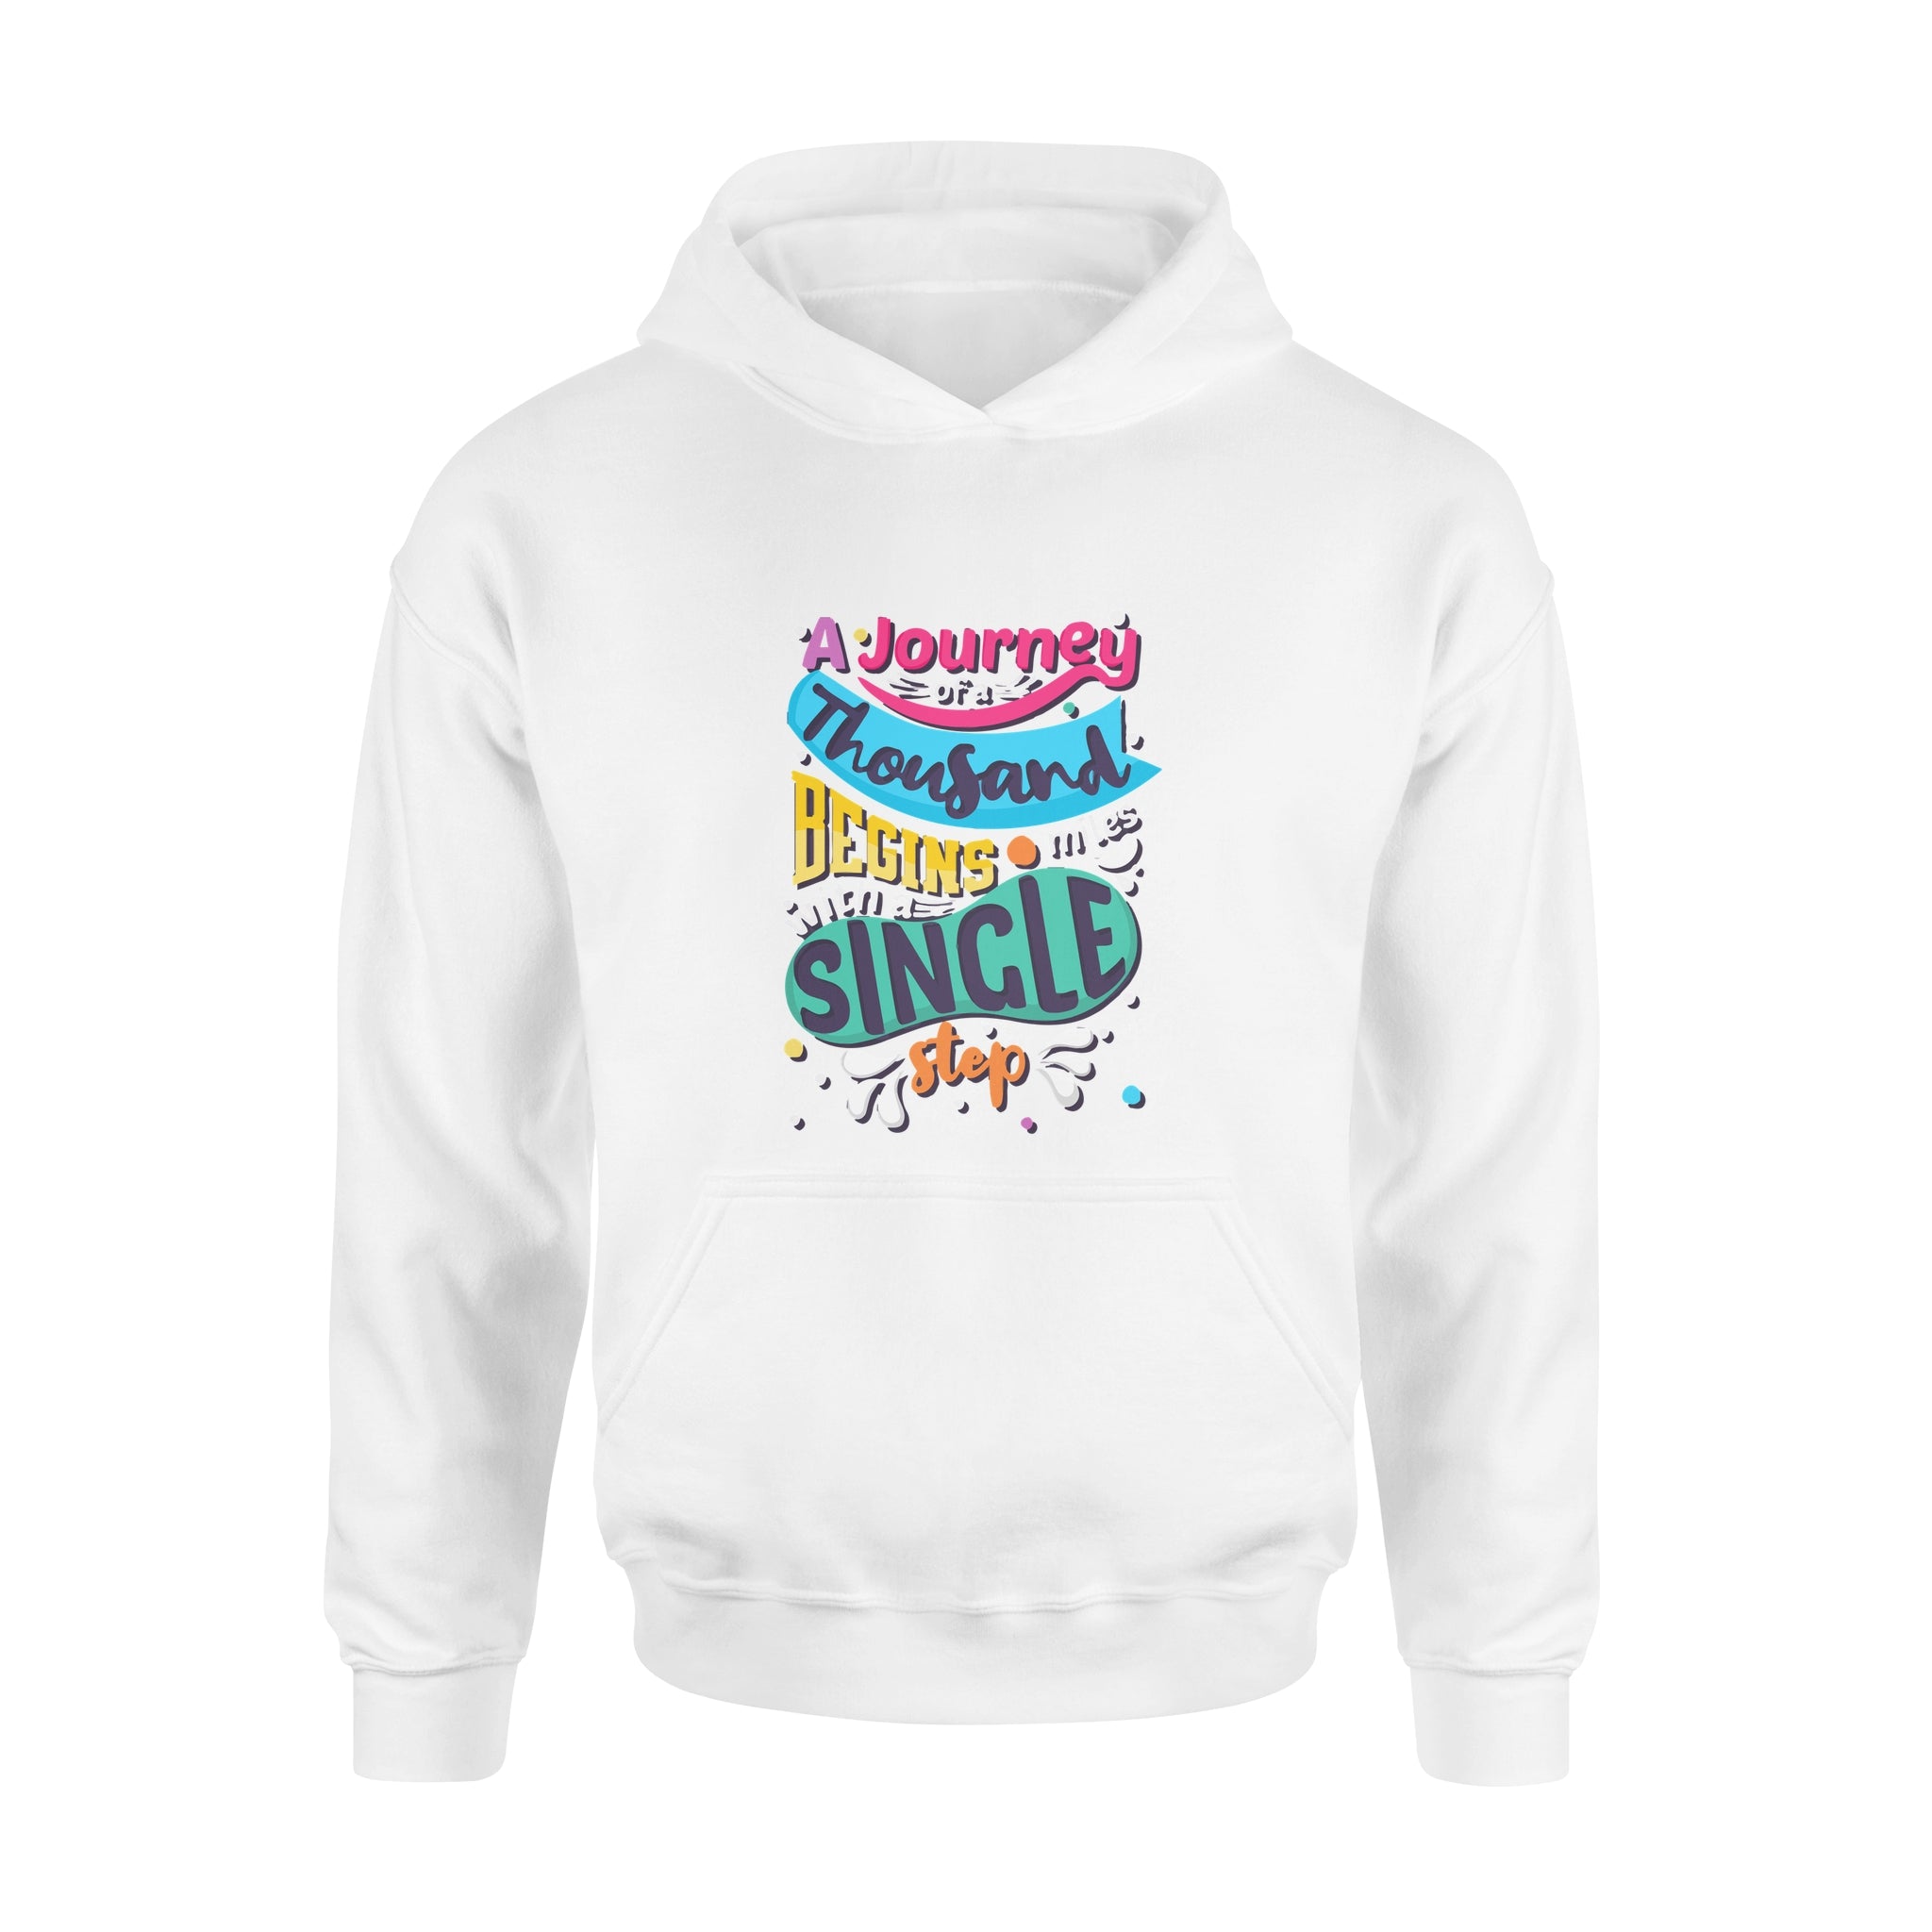 Aj Journey of a Thousand Miles Begins with a Single Step - Hoodie